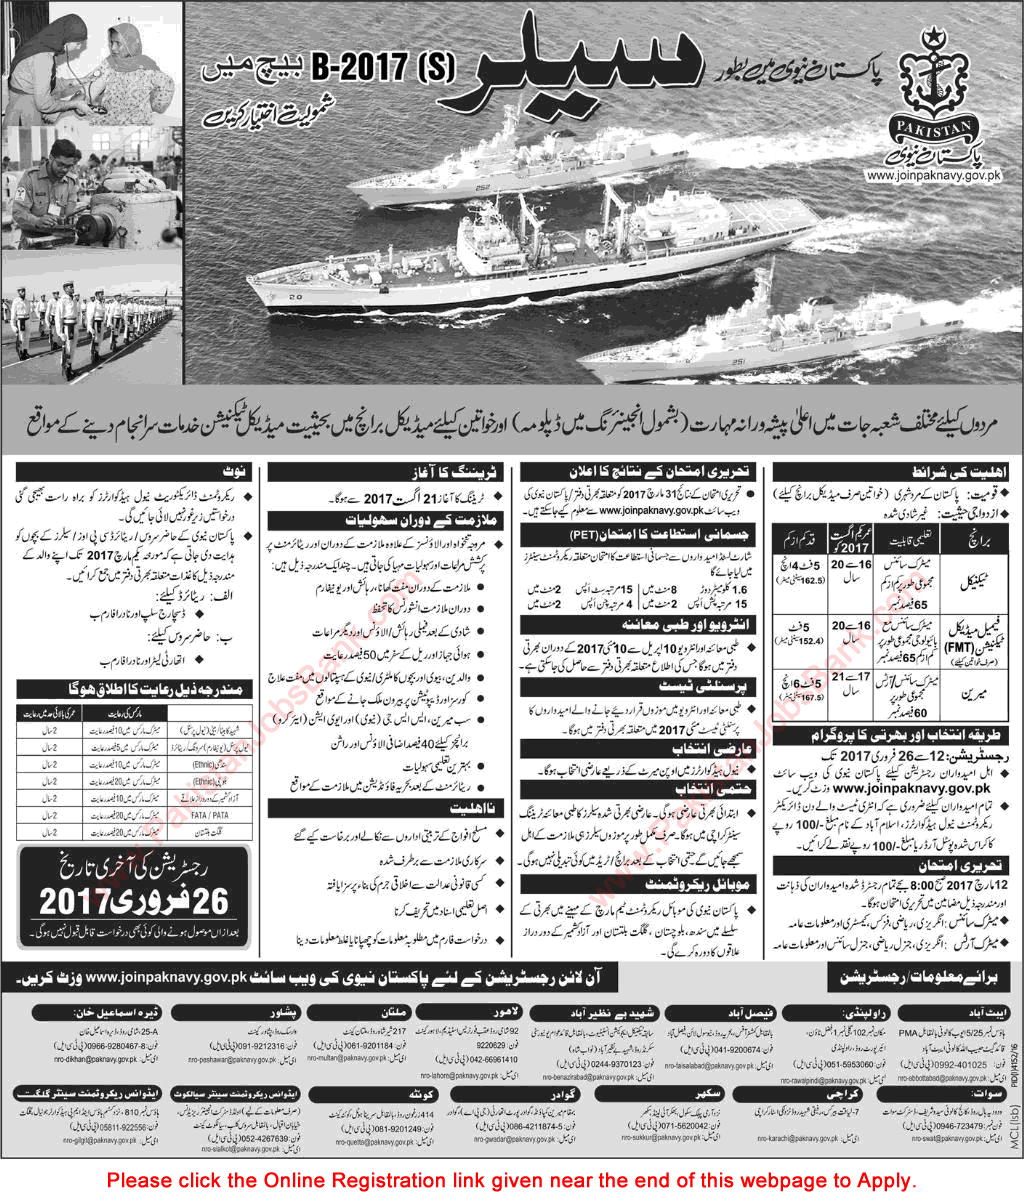 Join Pakistan Navy as Sailor 2017 February Online Registration Jobs in B-2017(S) Batch Technical, FMT & Marine Latest